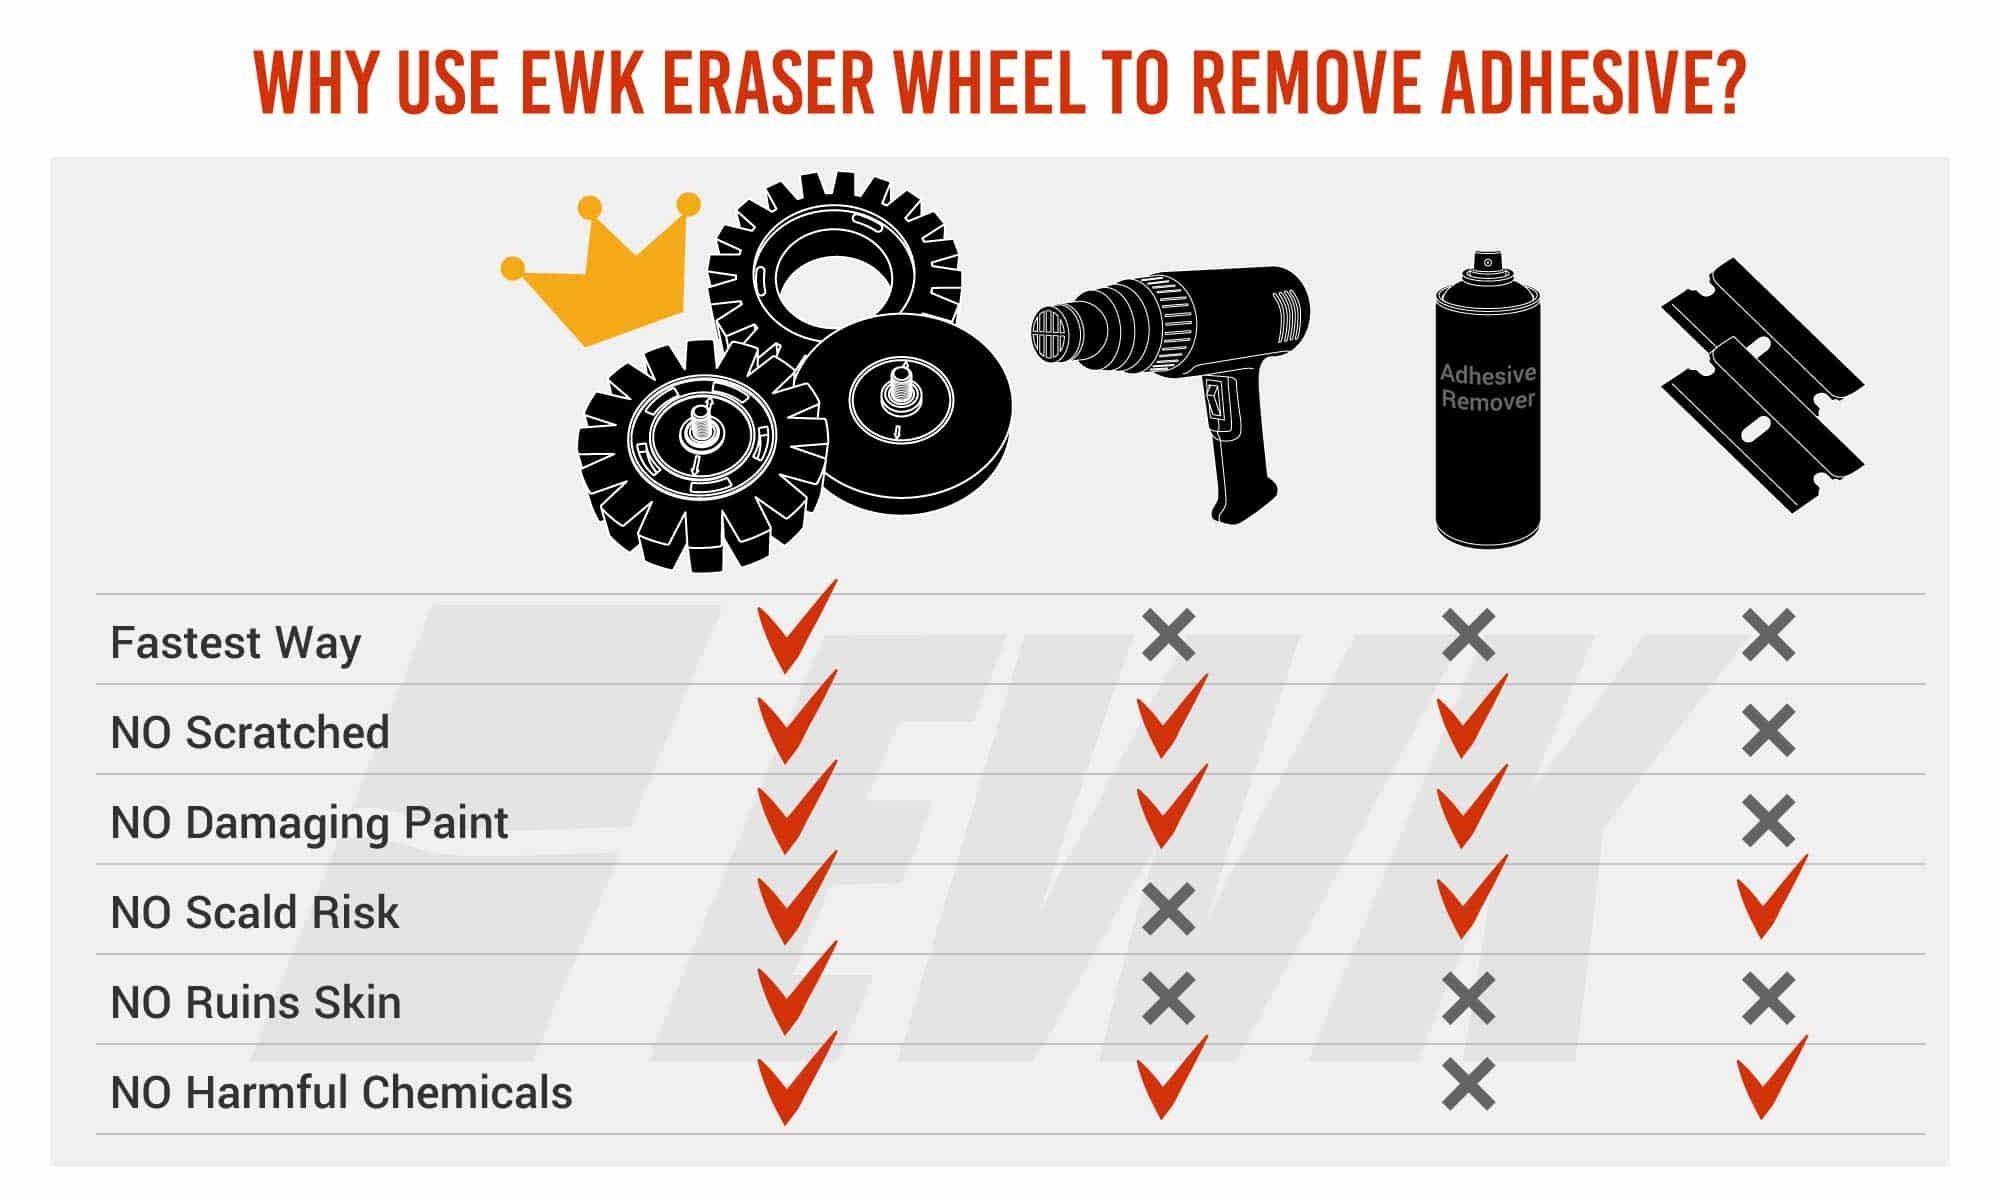 Generic EWK Rubber Eraser Wheel and Adhesive Remover for Cars